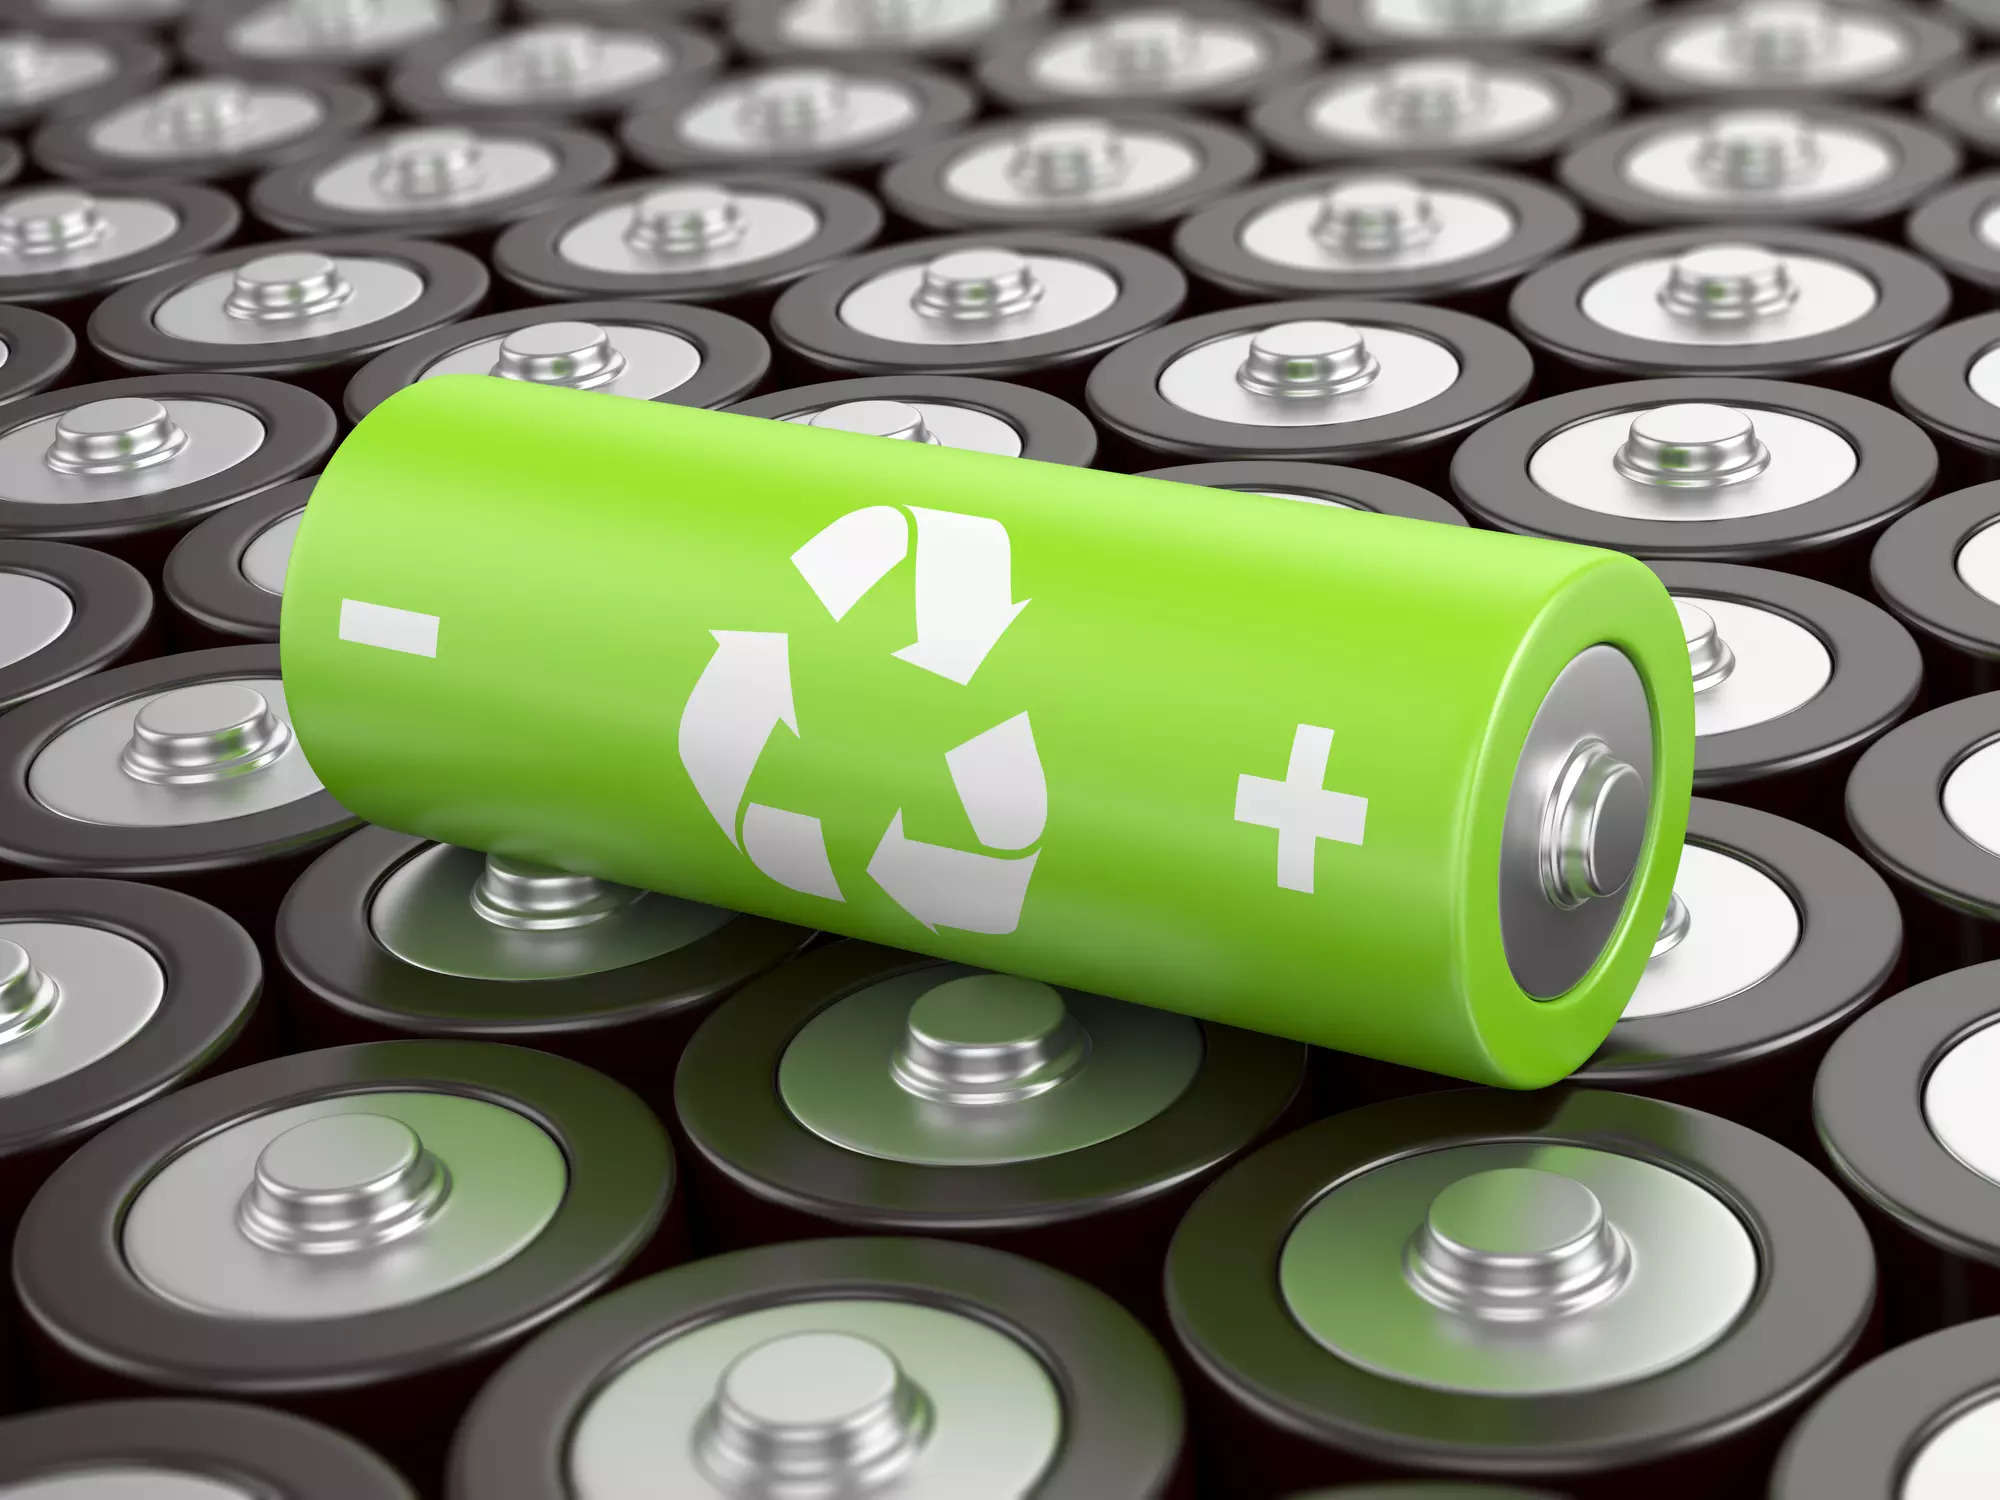  While startups dominate the headlines for recycling, automakers and battery manufacturers have announced plans to establish their own recycling facilities.